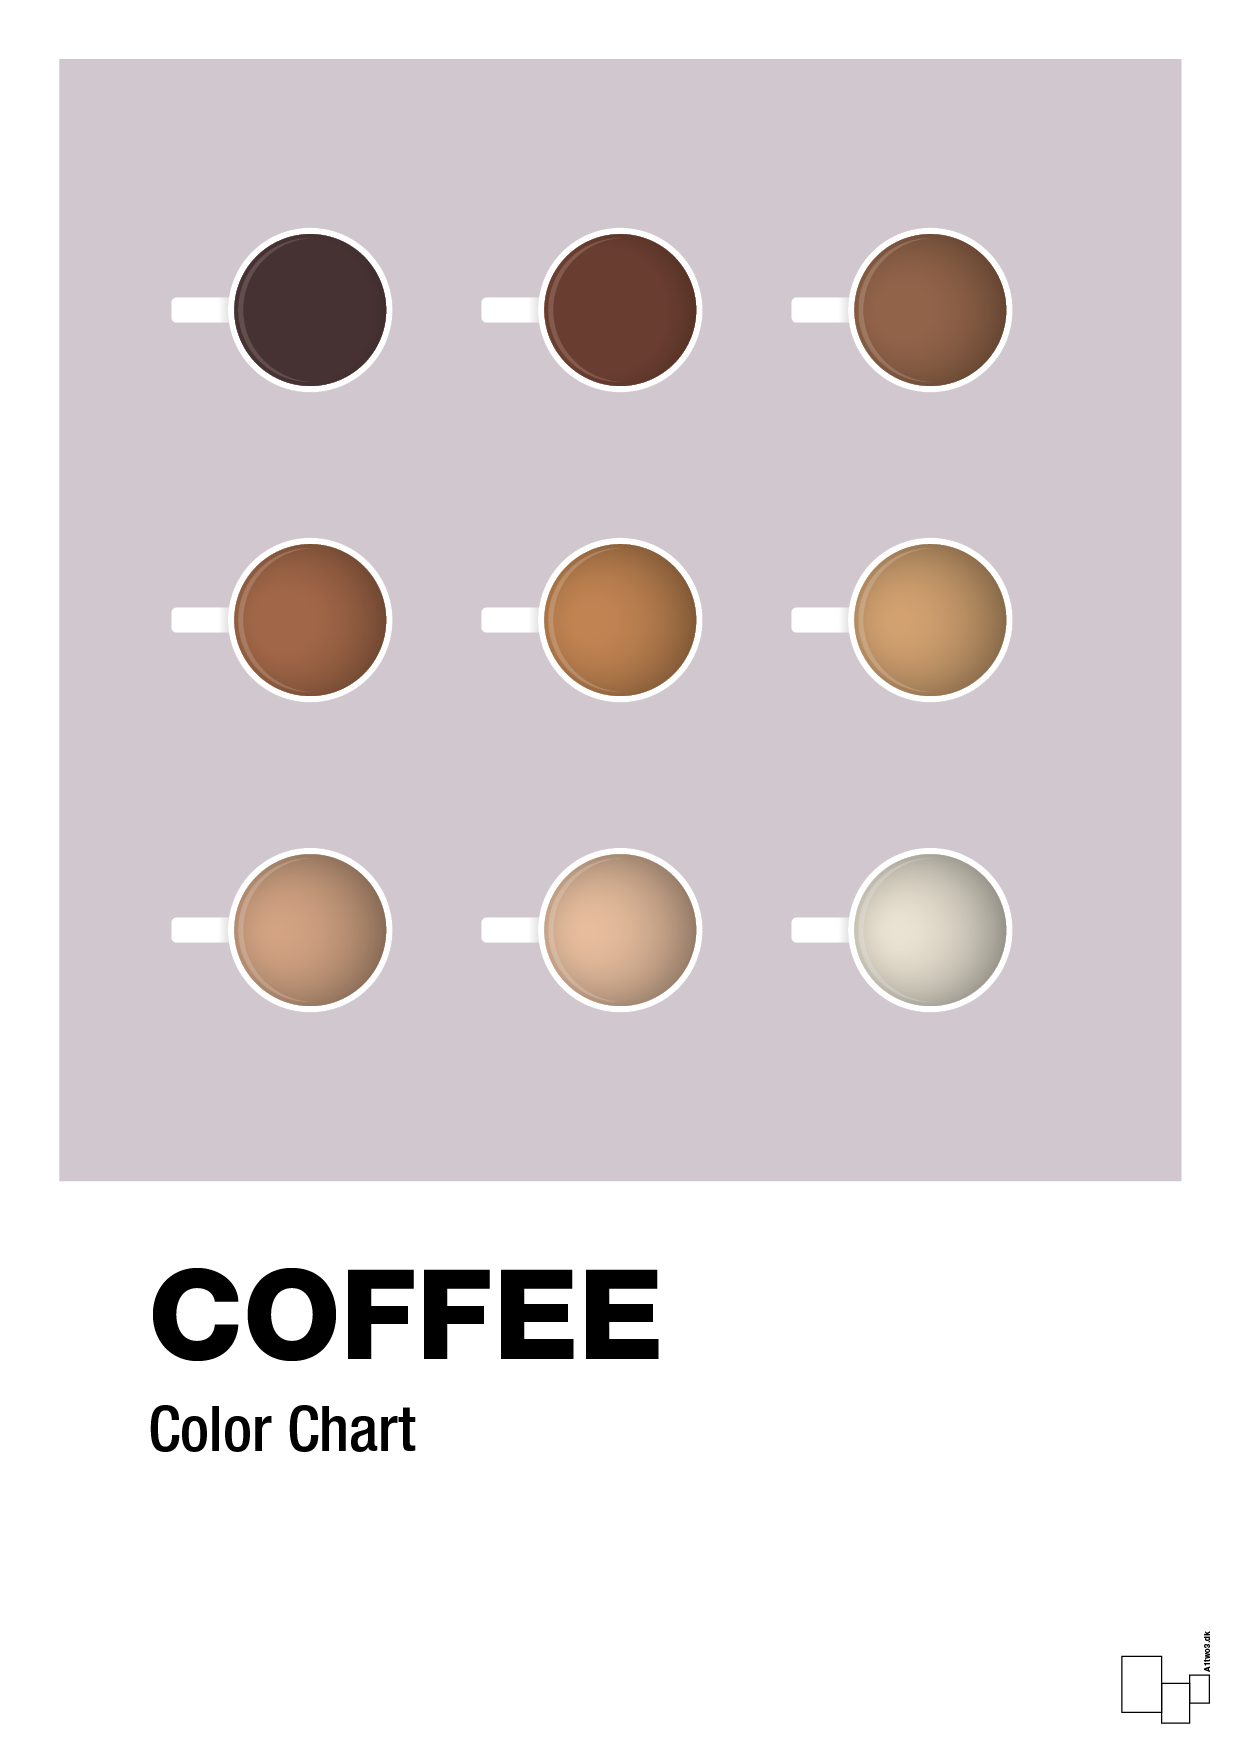 coffee color chart - Plakat med Mad & Drikke i Dusty Lilac